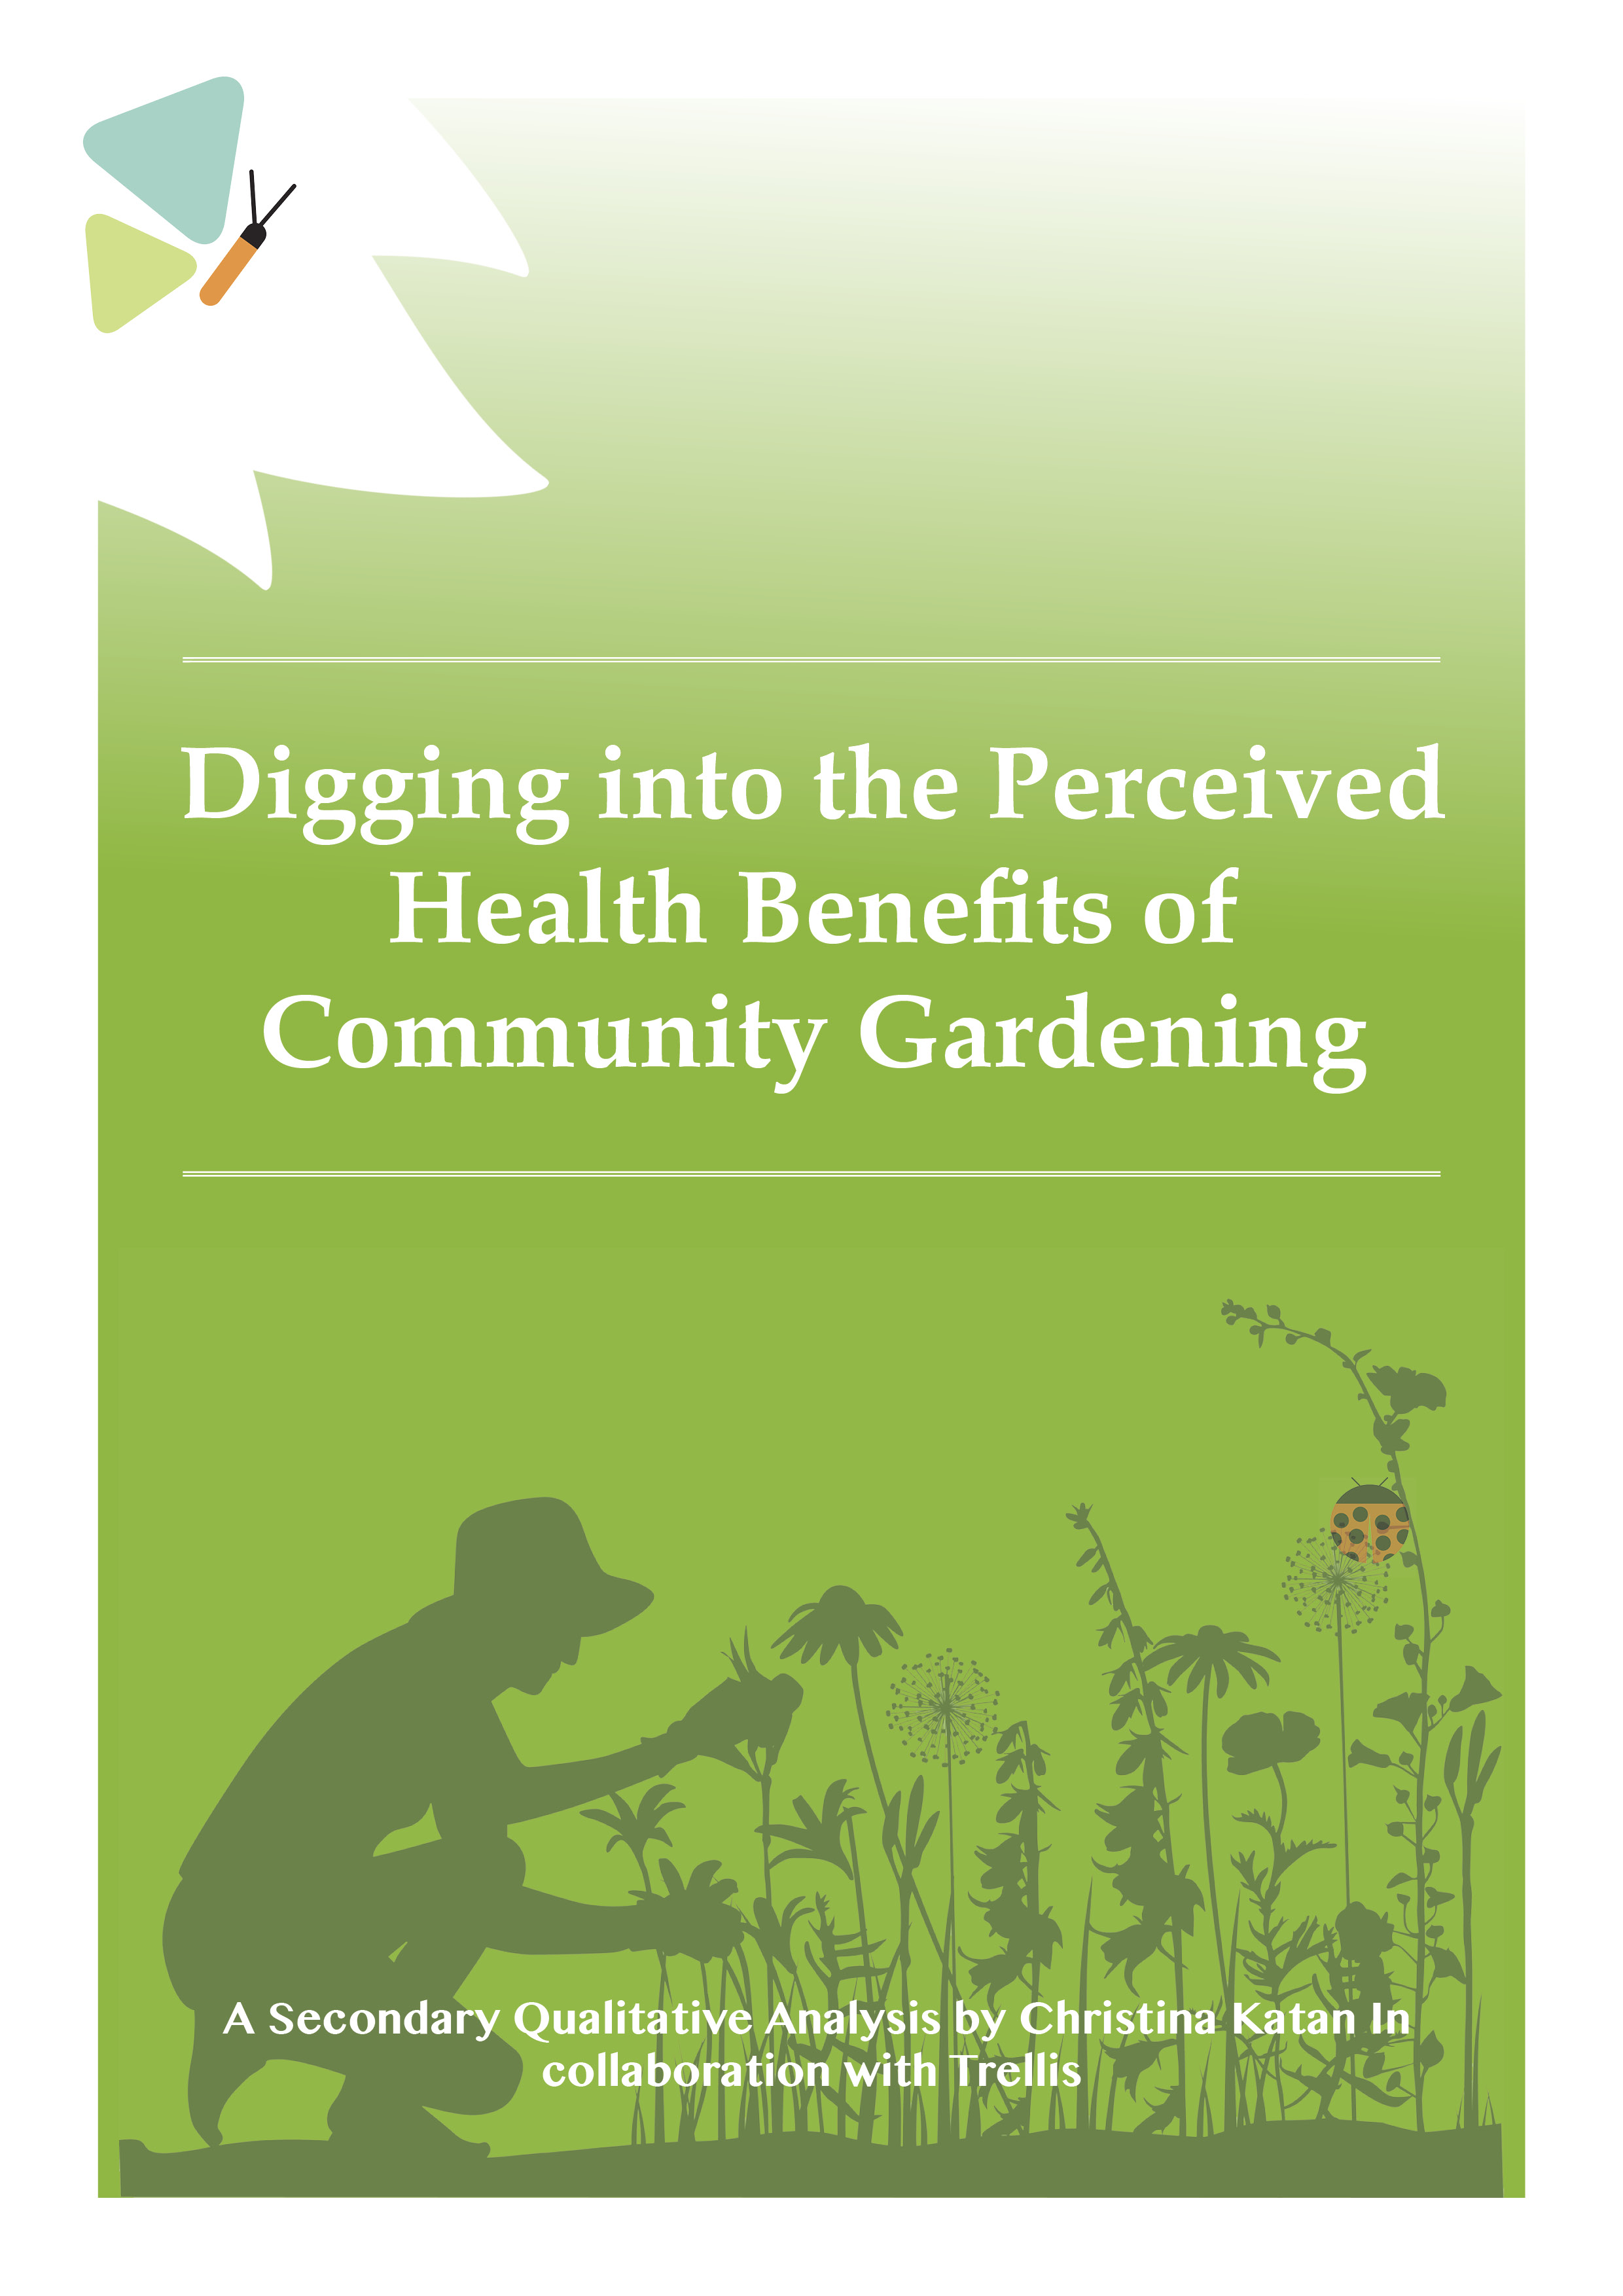 Digging into the Perceived Health Benefits of Community Gardening